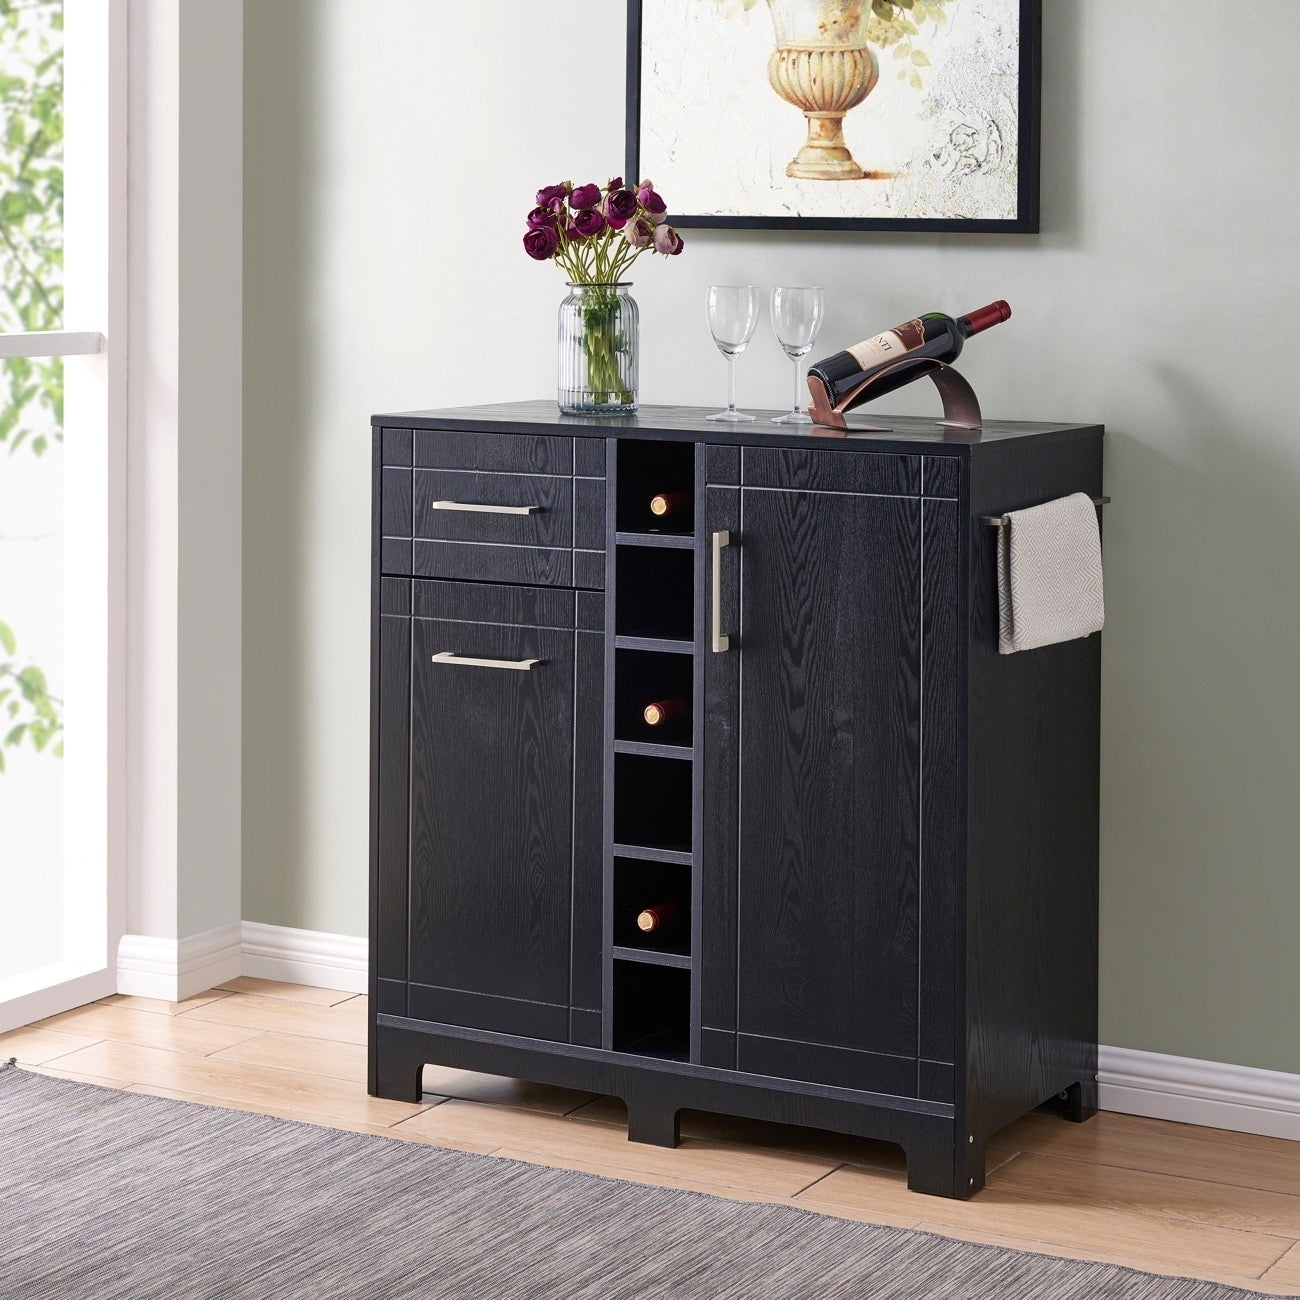 Belleze Vietti Bar Bottle Storage Cabinets And Drawer Black throughout dimensions 1300 X 1300